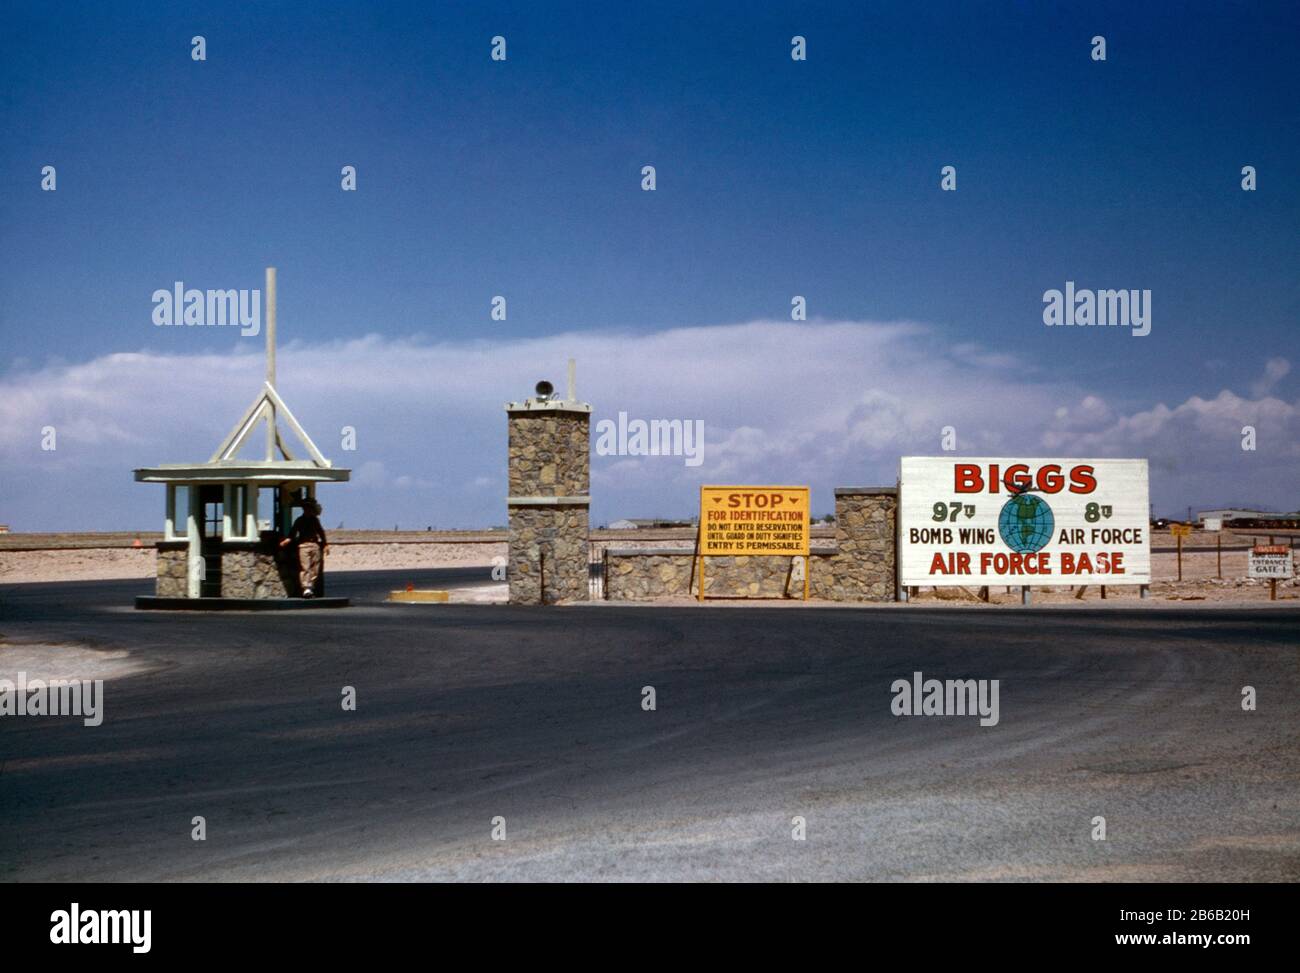 Vintage circa 1947 photograph, entrance Gate 1 at Biggs Air Force Base, home of the 97th Bomb Wing and the 8th Air Force. Location, El Paso, Texas. SOURCE: ORIGINAL TRANSPARENCY Stock Photo